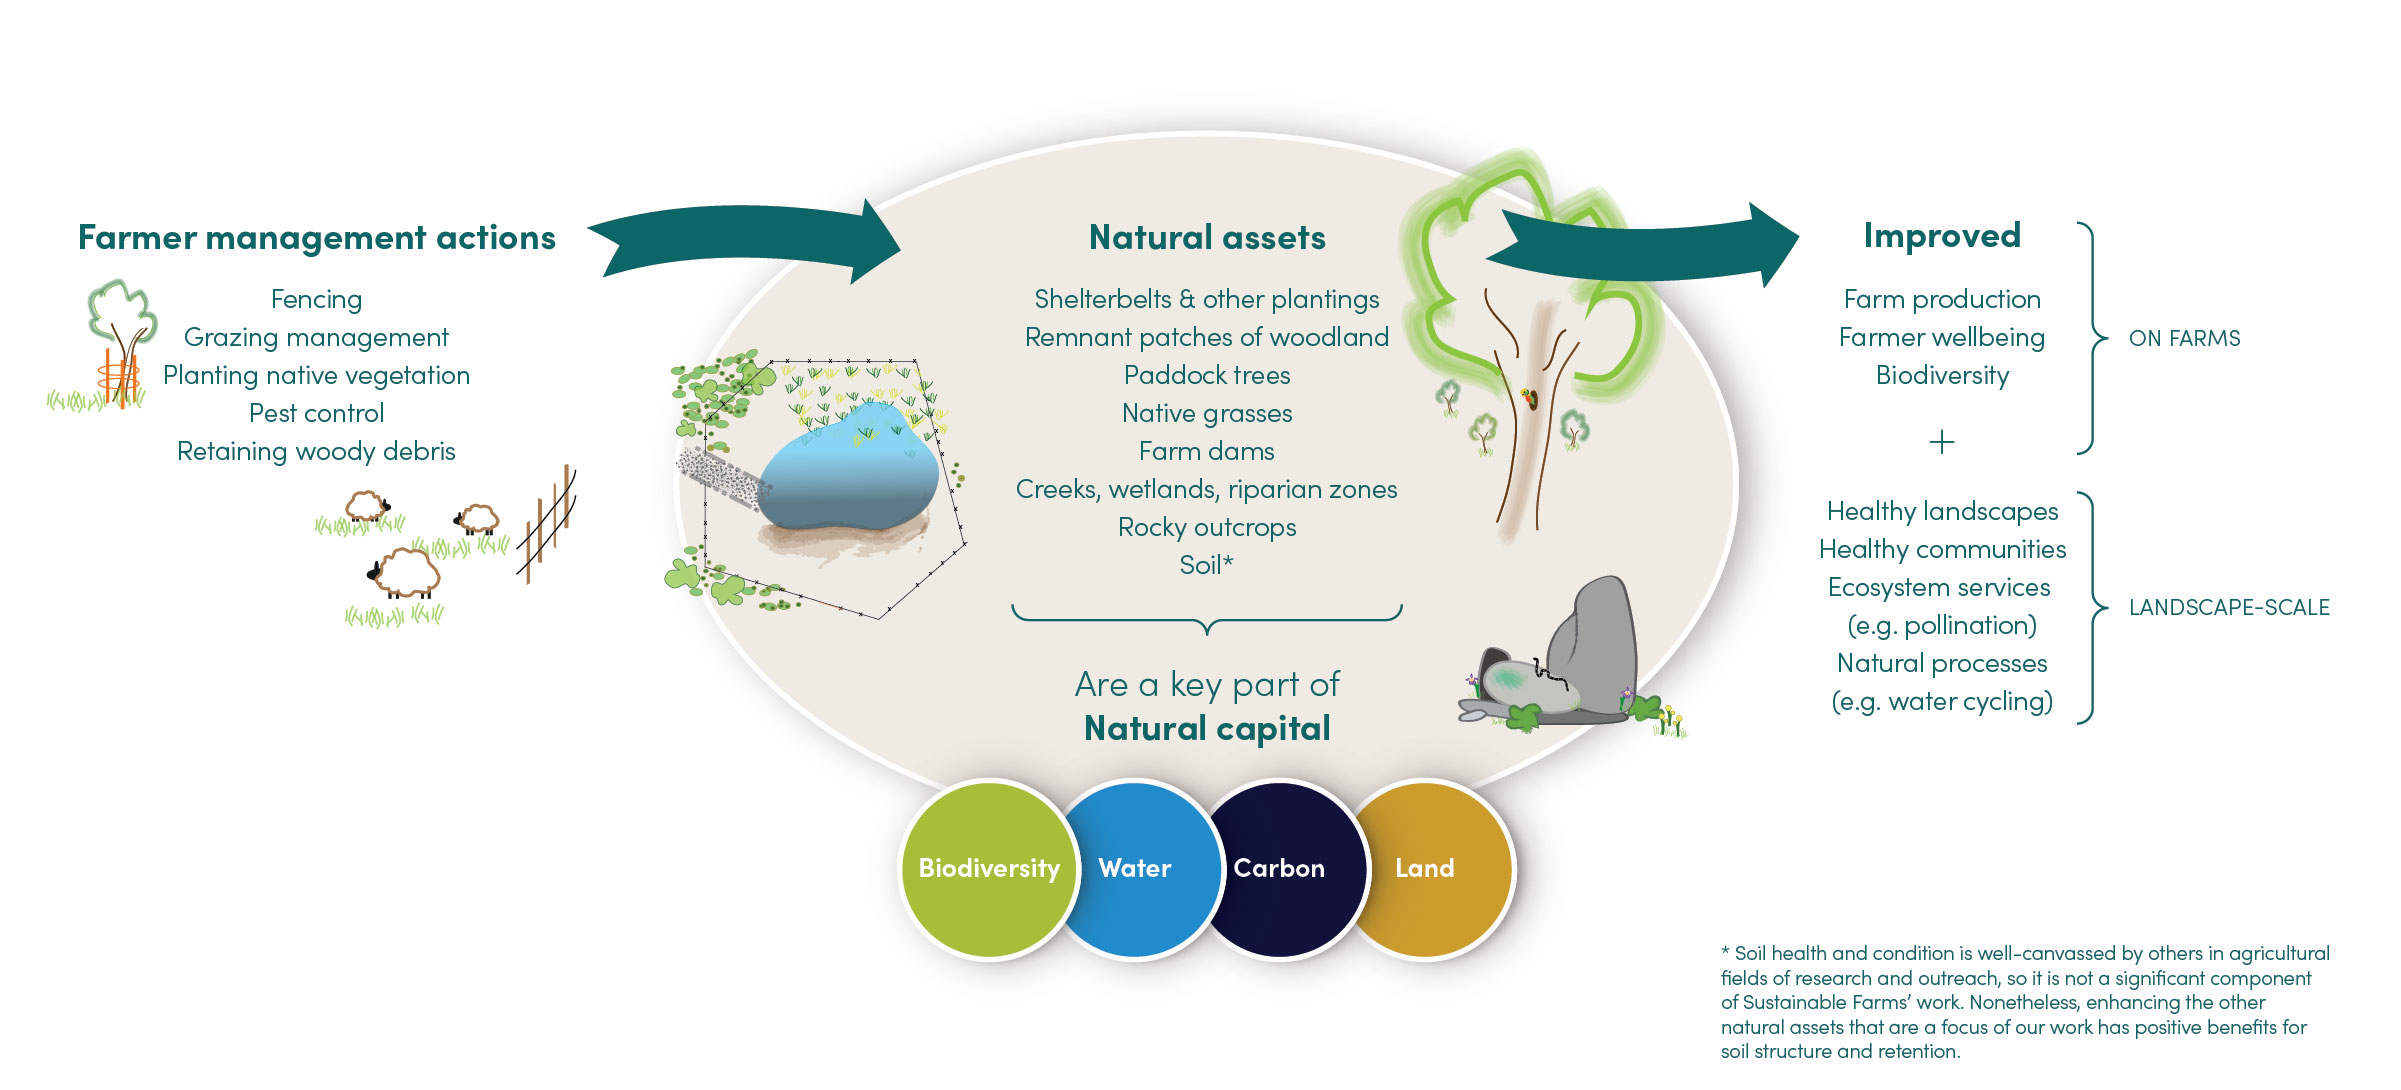 Diagram showing the relationship between natural capital and natural assets